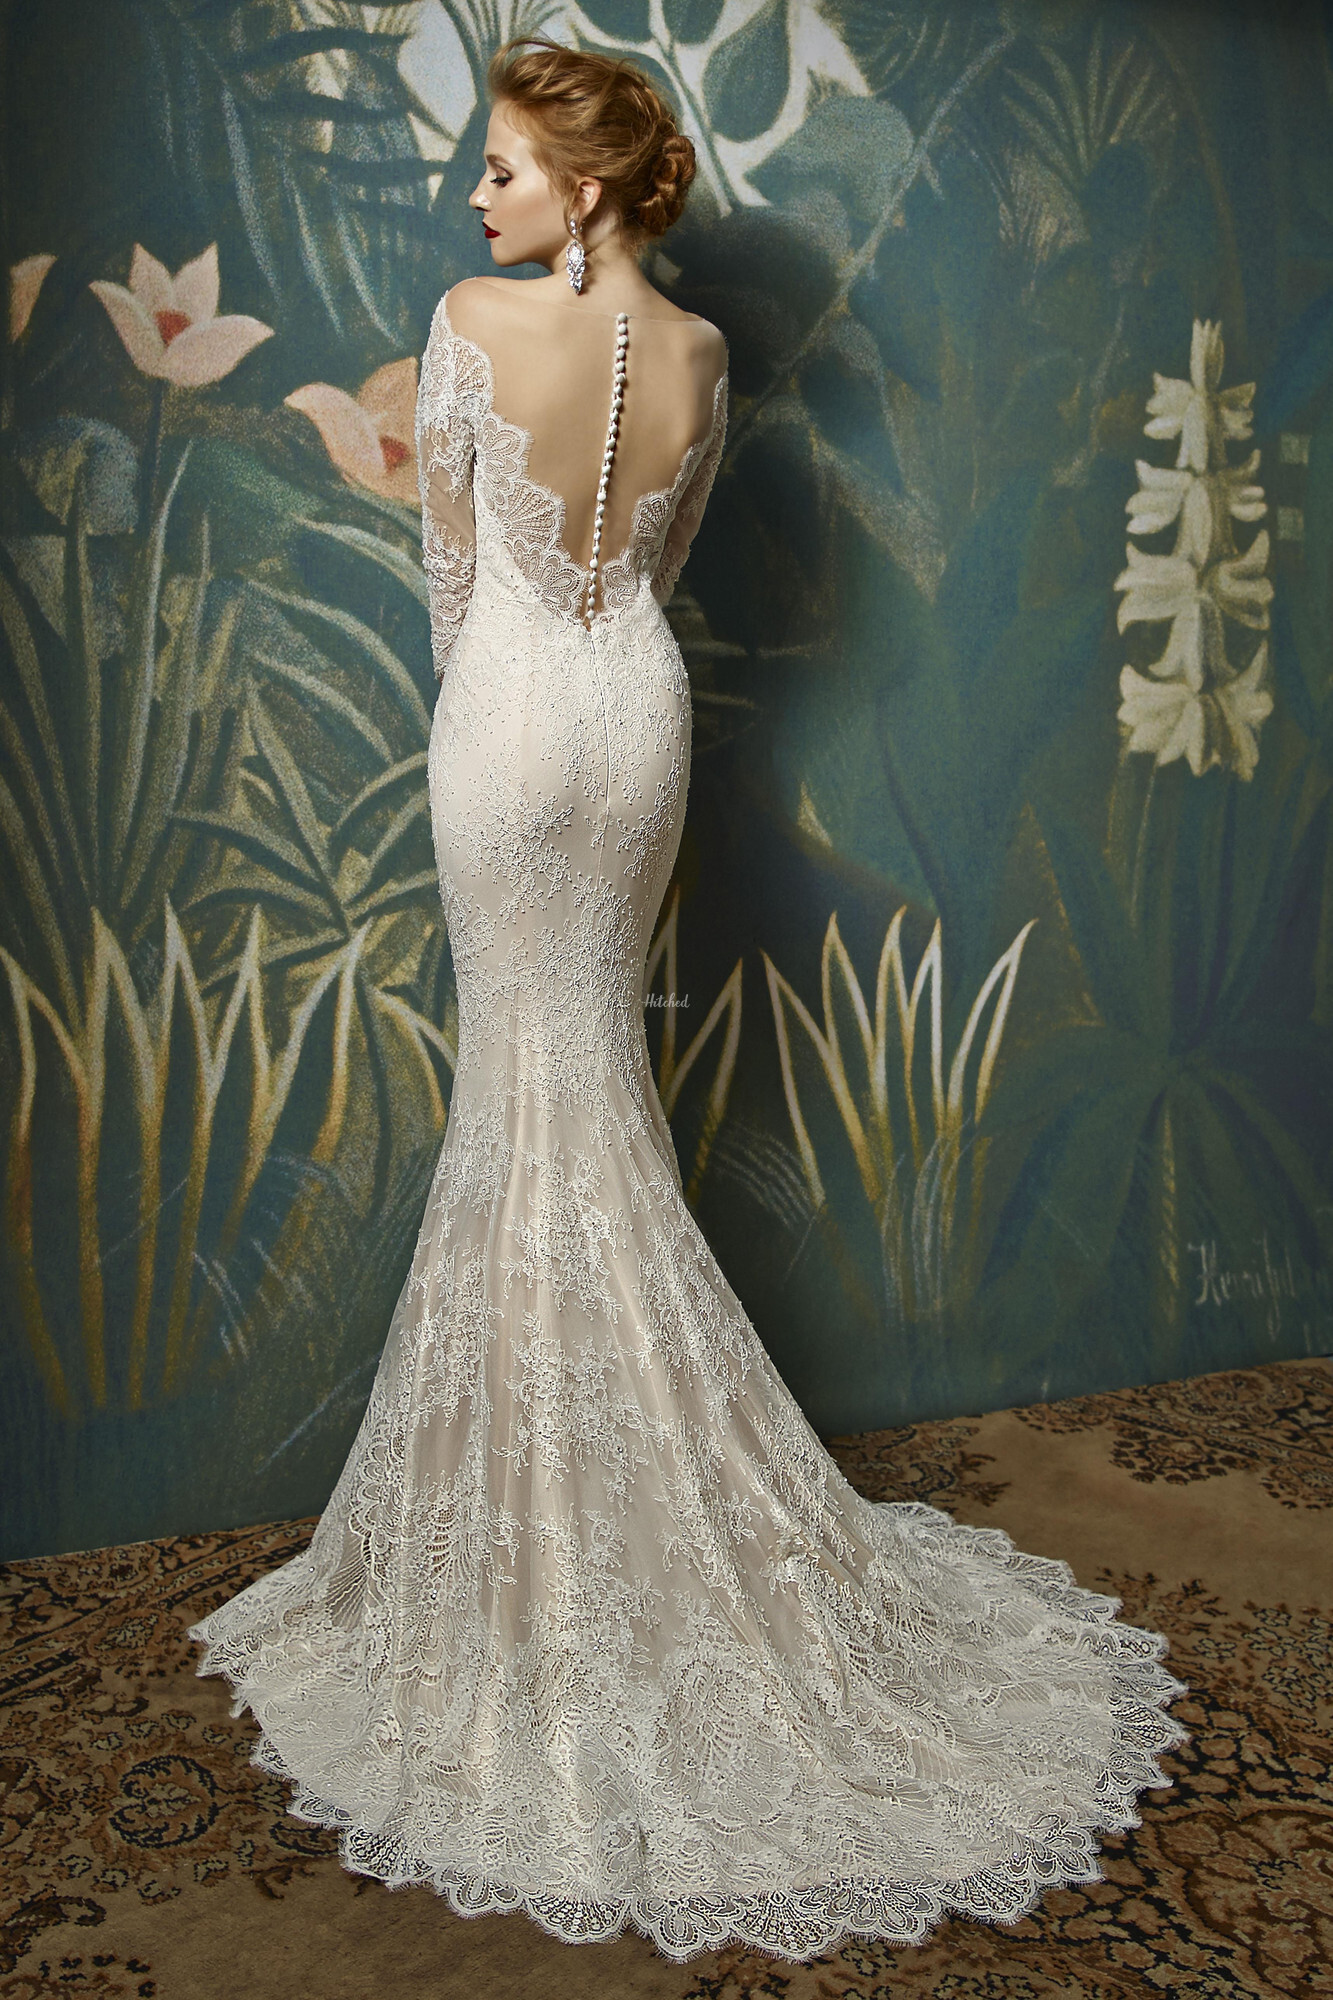 Jadorie Wedding Dress from Blue By Enzoani - hitched.co.uk